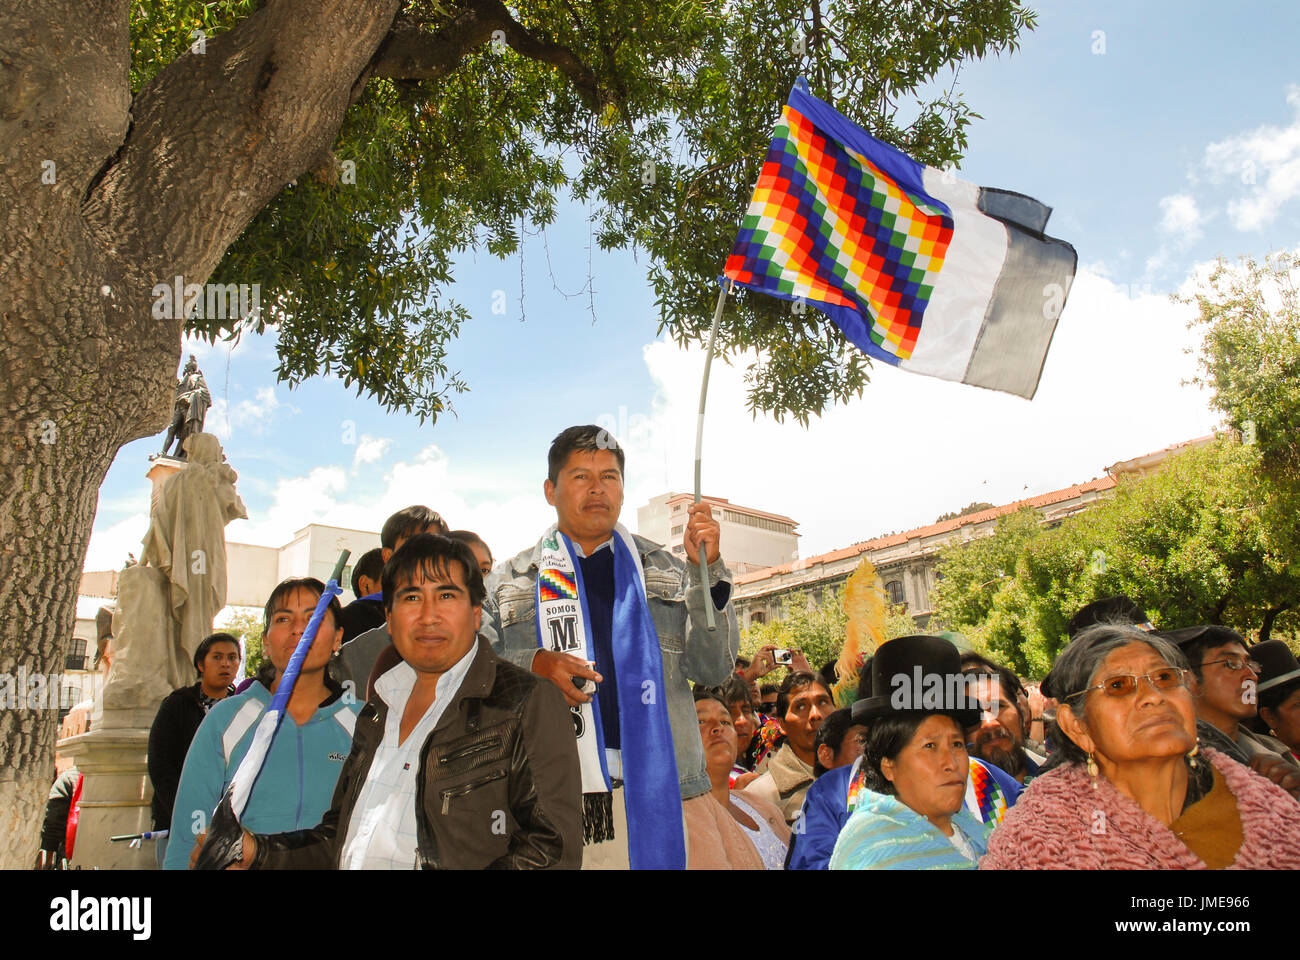 Bolivian people with whipala flag during the celebration of plurinational state foundation day, La Paz, Bolivia, South America Stock Photo